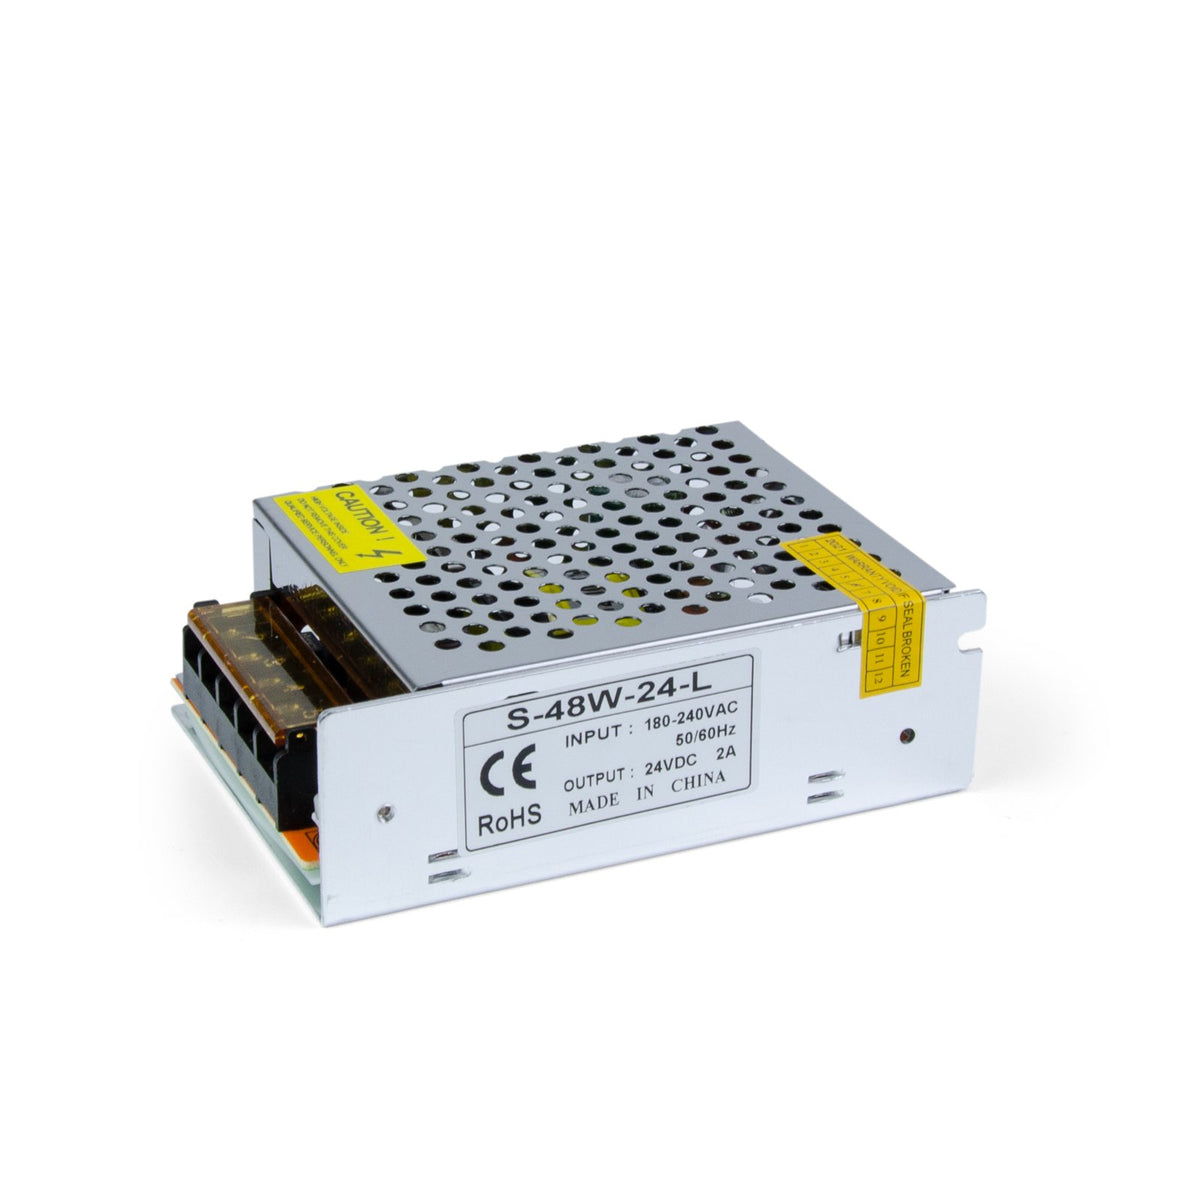 G.W.S LED Wholesale LED Drivers/LED Power Supplies IP20 (Non-Waterproof) 24V 2A 48W LED Driver